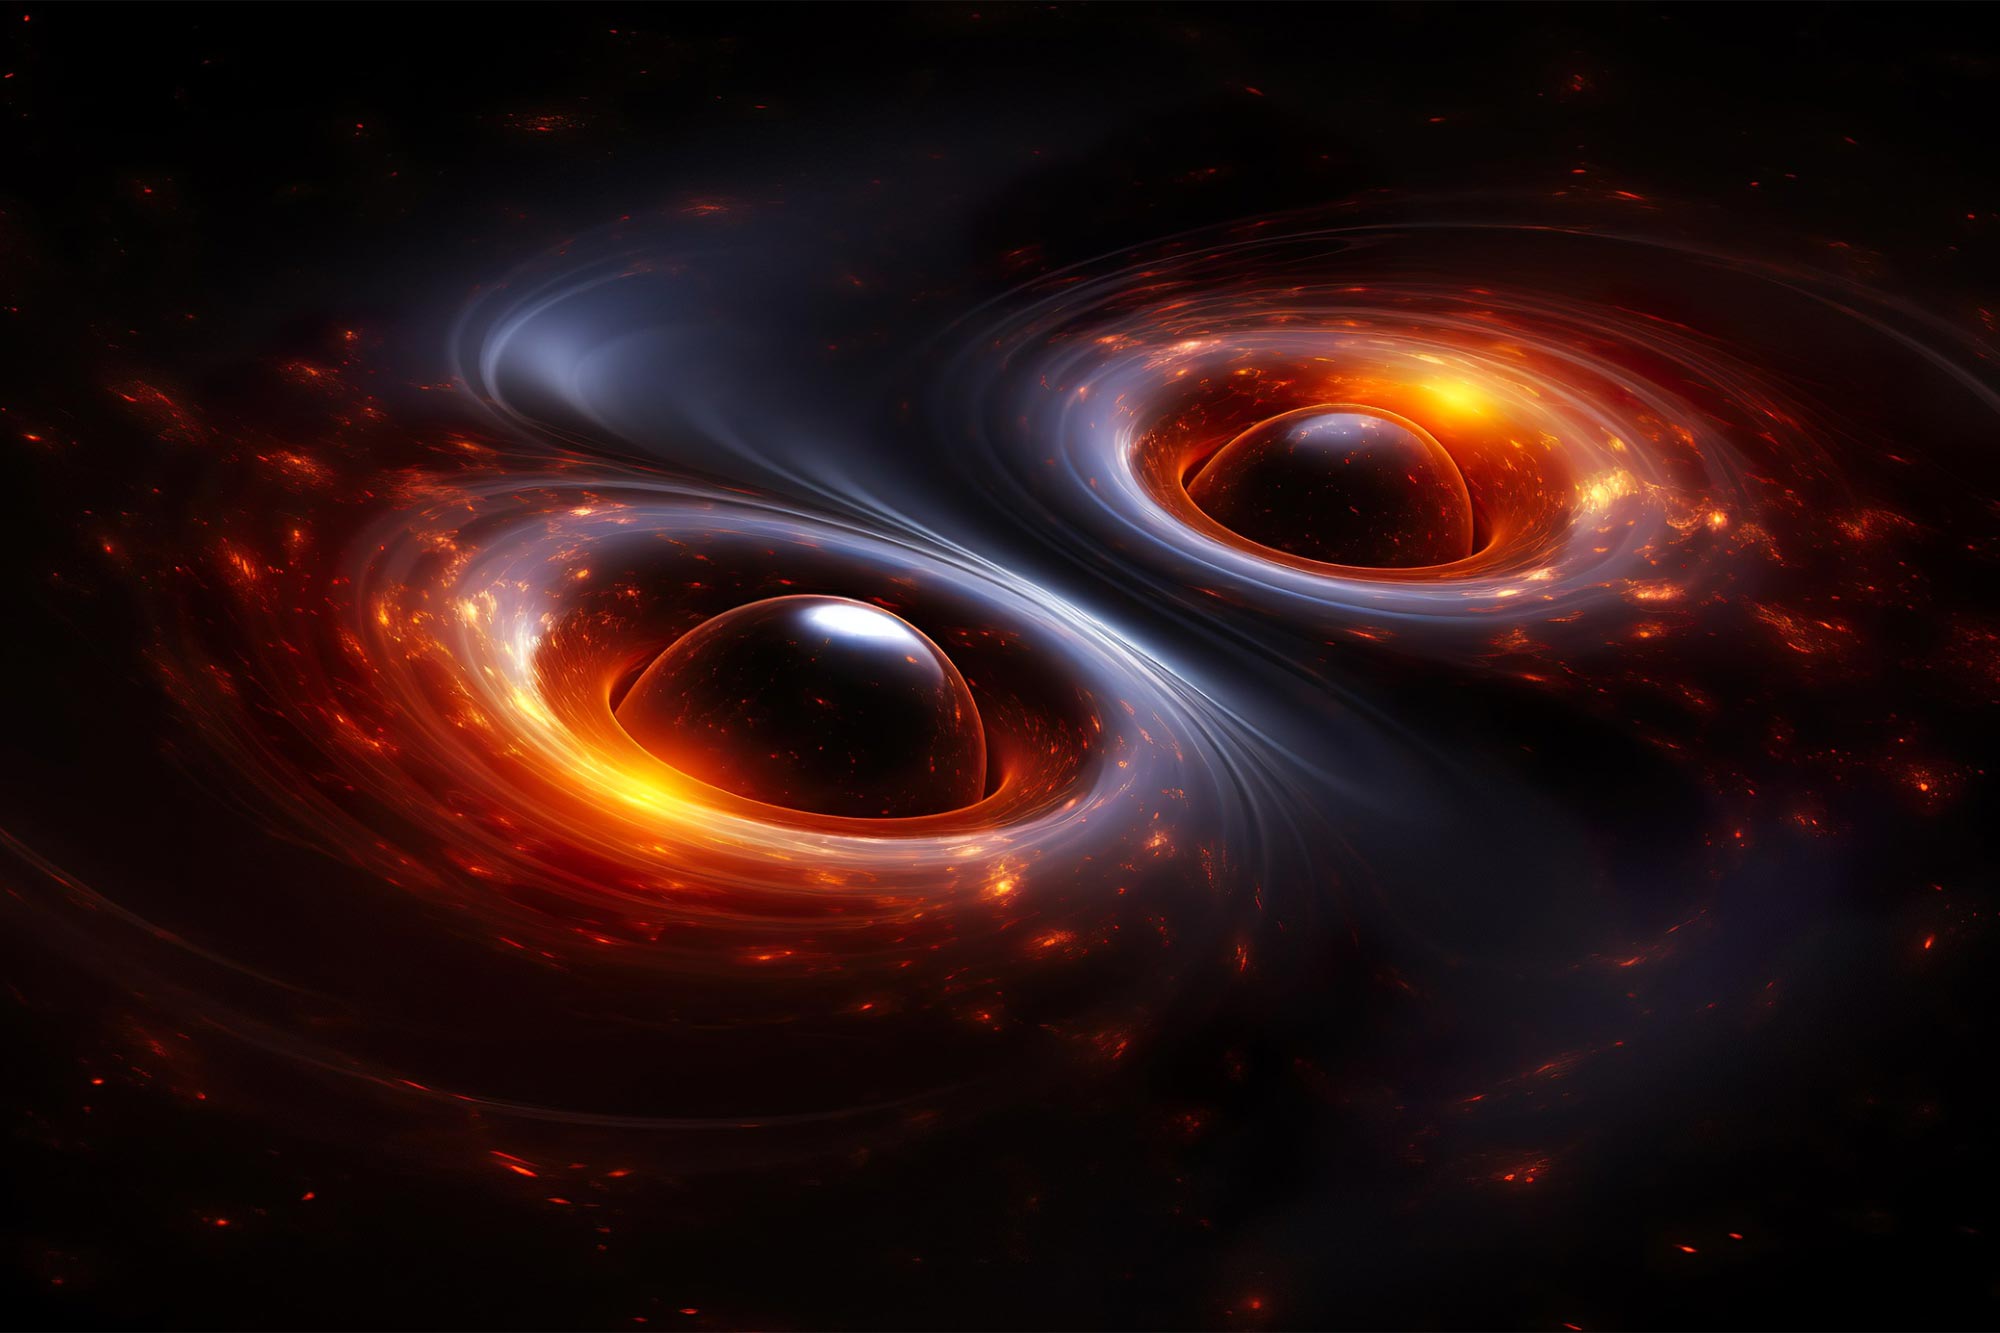 louder-than-expected-gravitational-waves-from-merging-supermassive-black-holes-heard-for-first-time